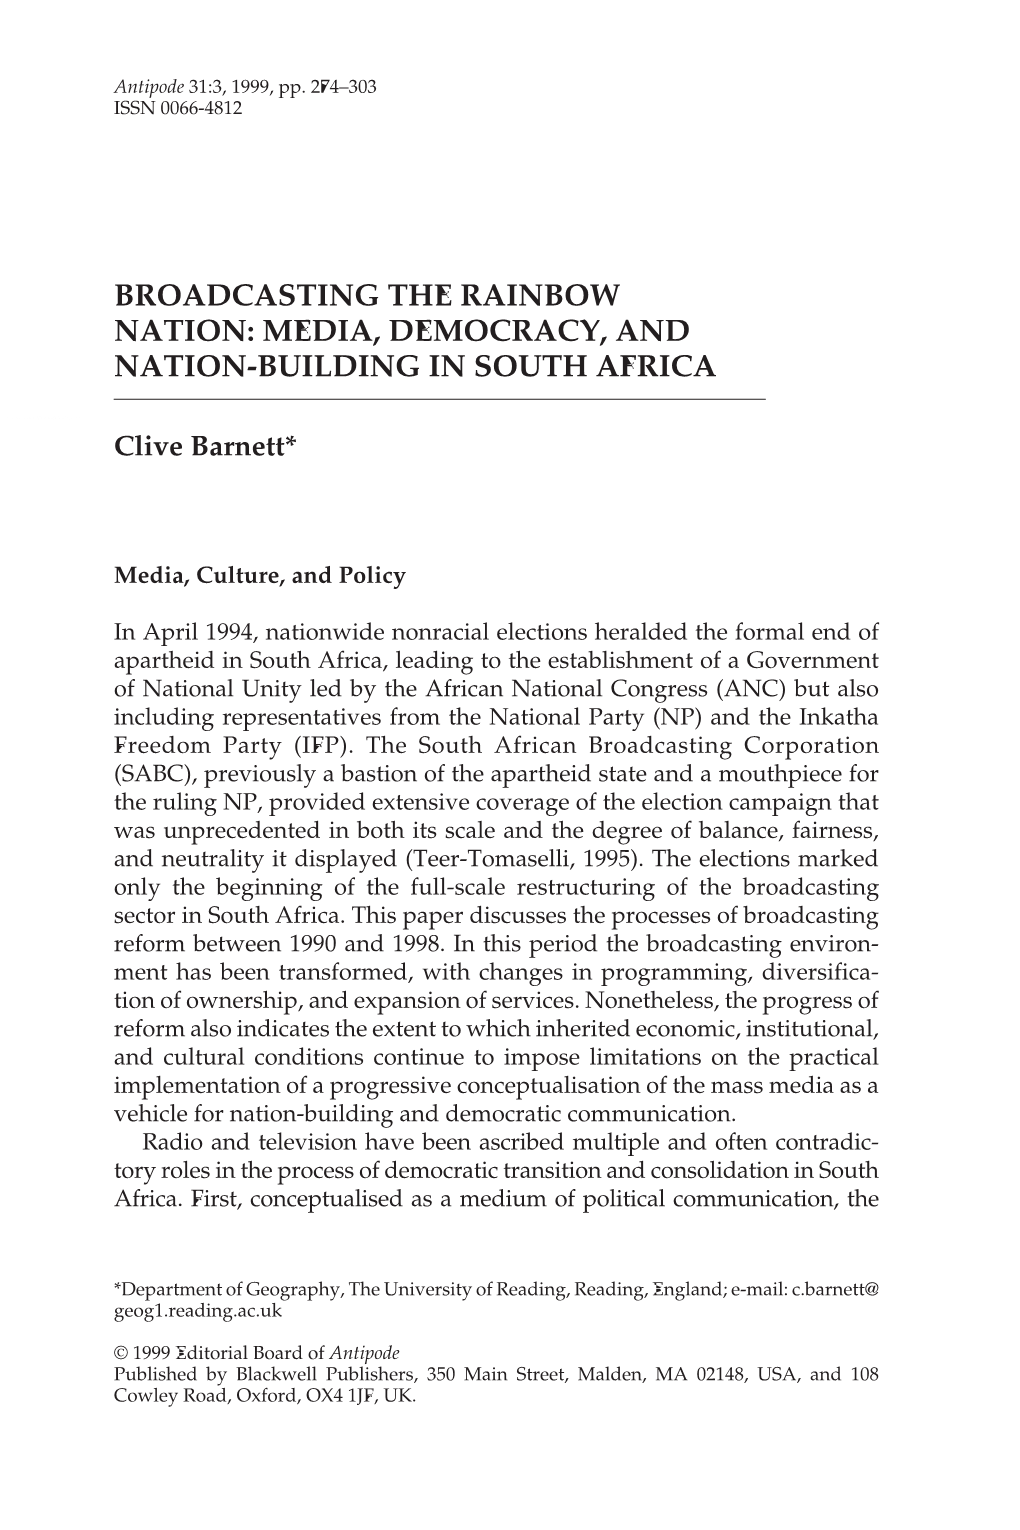 Broadcasting the Rainbow Nation: Media, Democracy, and Nation-Building in South Africa